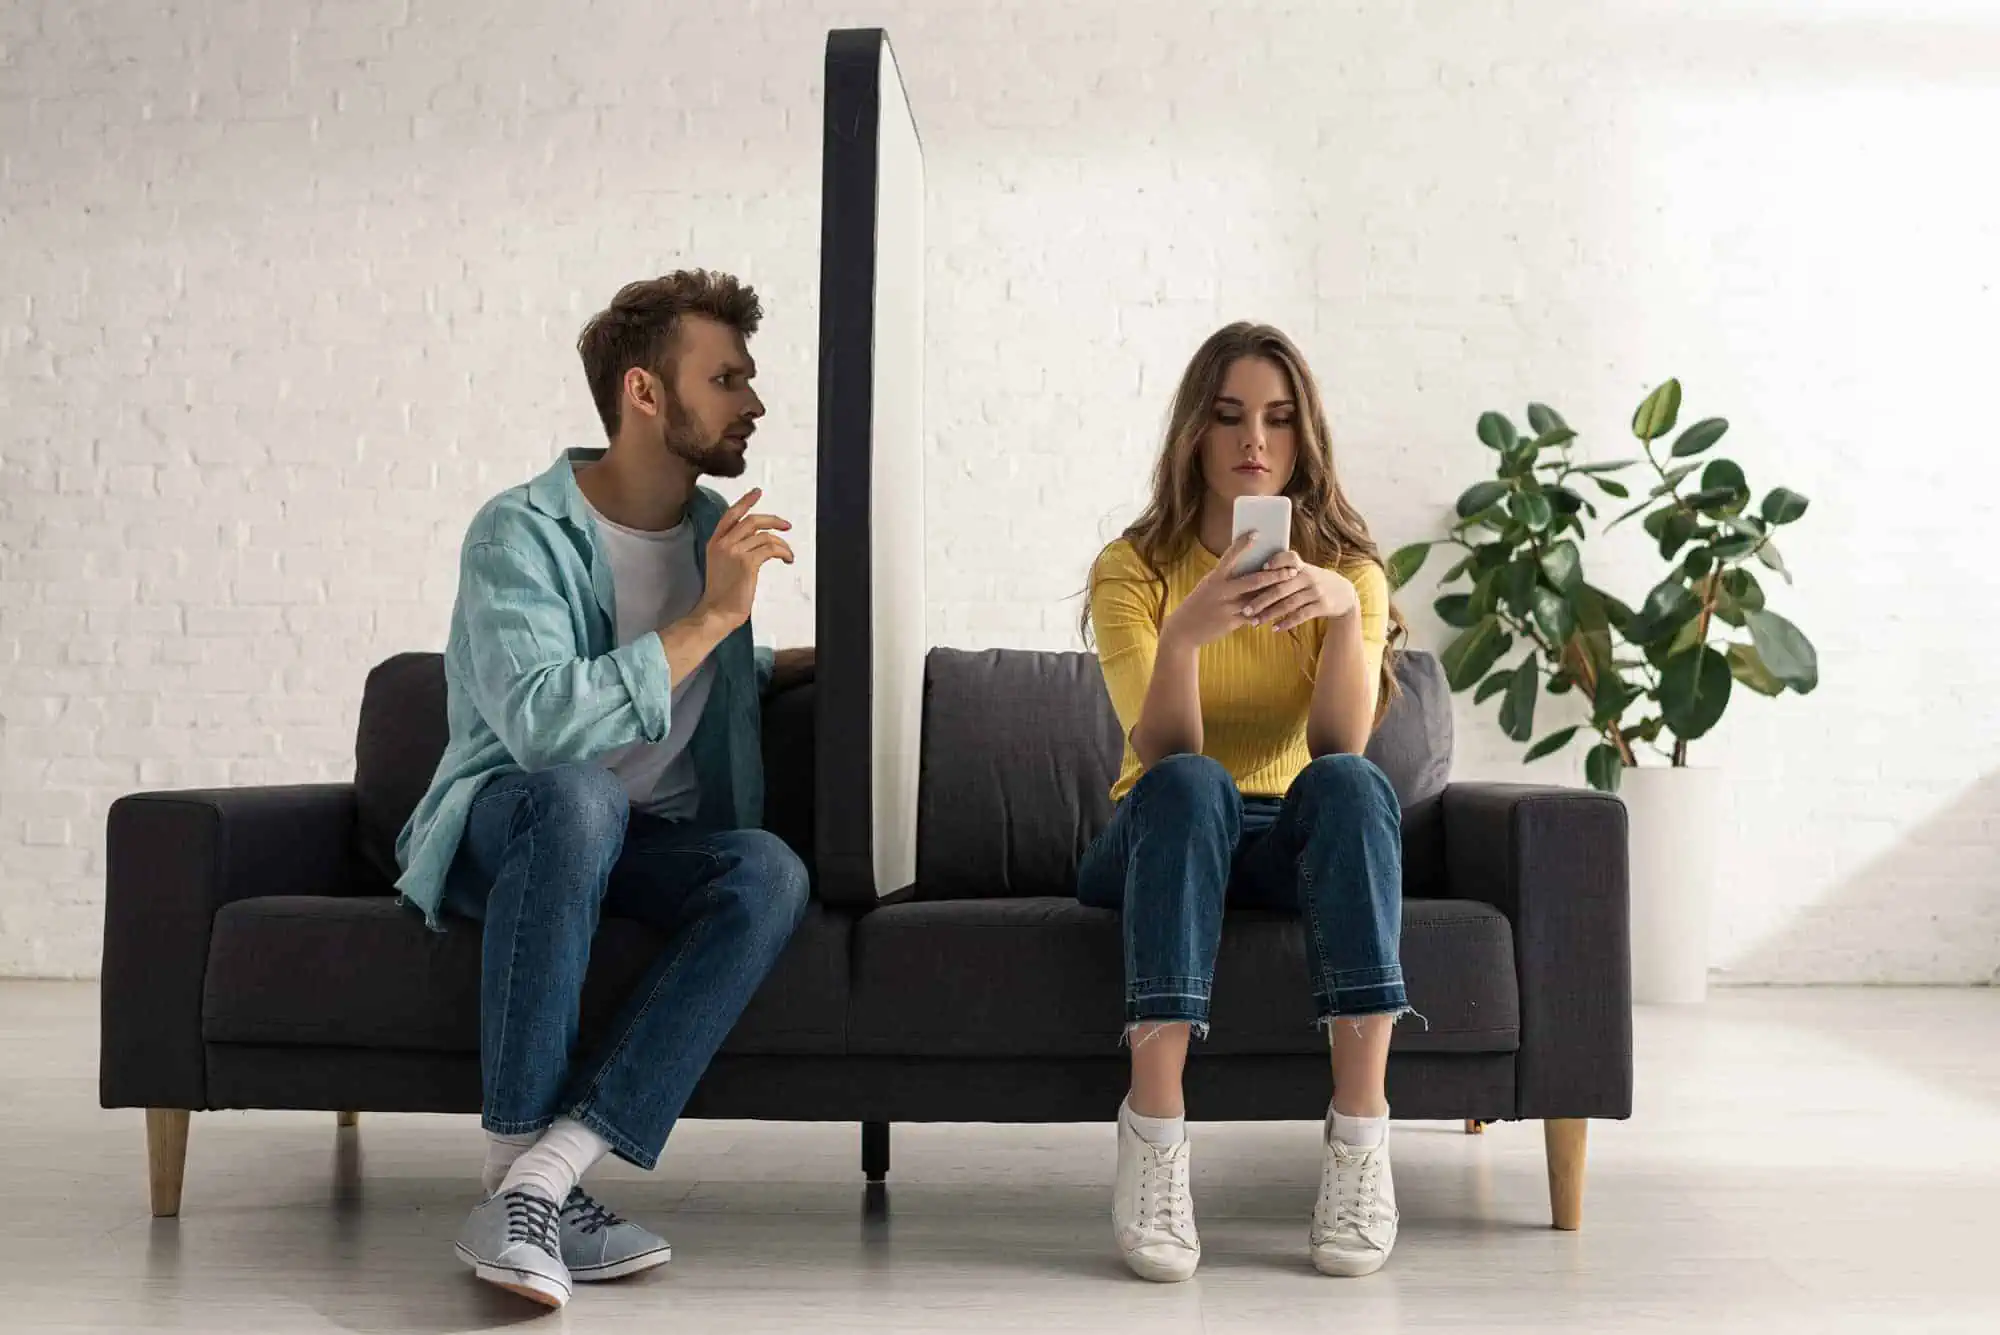 A man and woman sitting on a couch looking at their phones